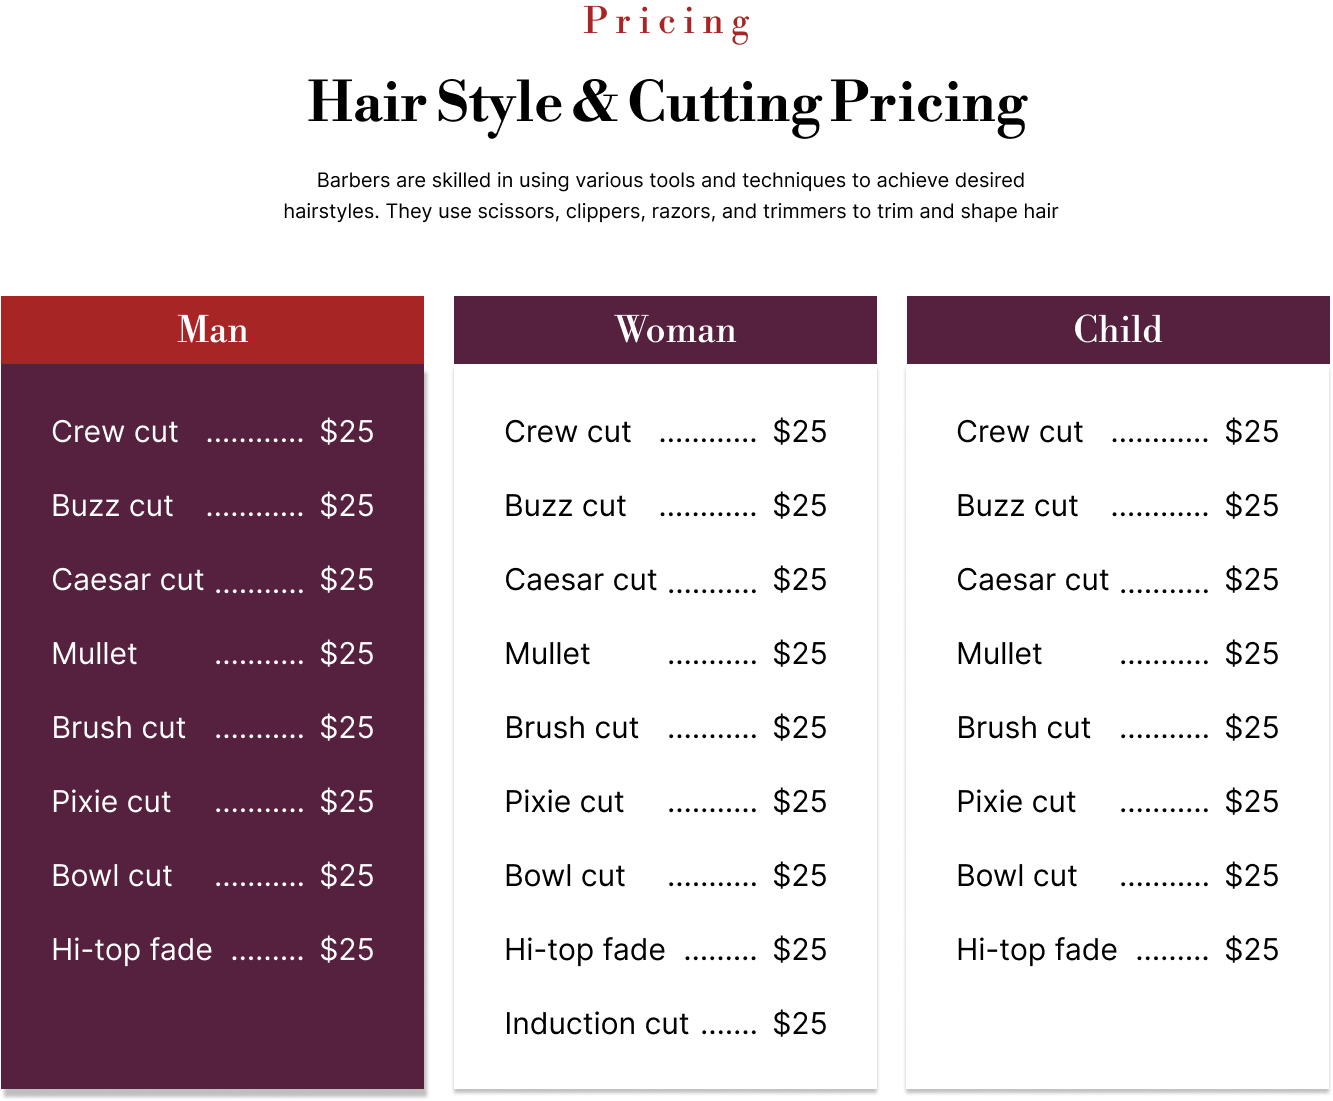 Pricing Packages